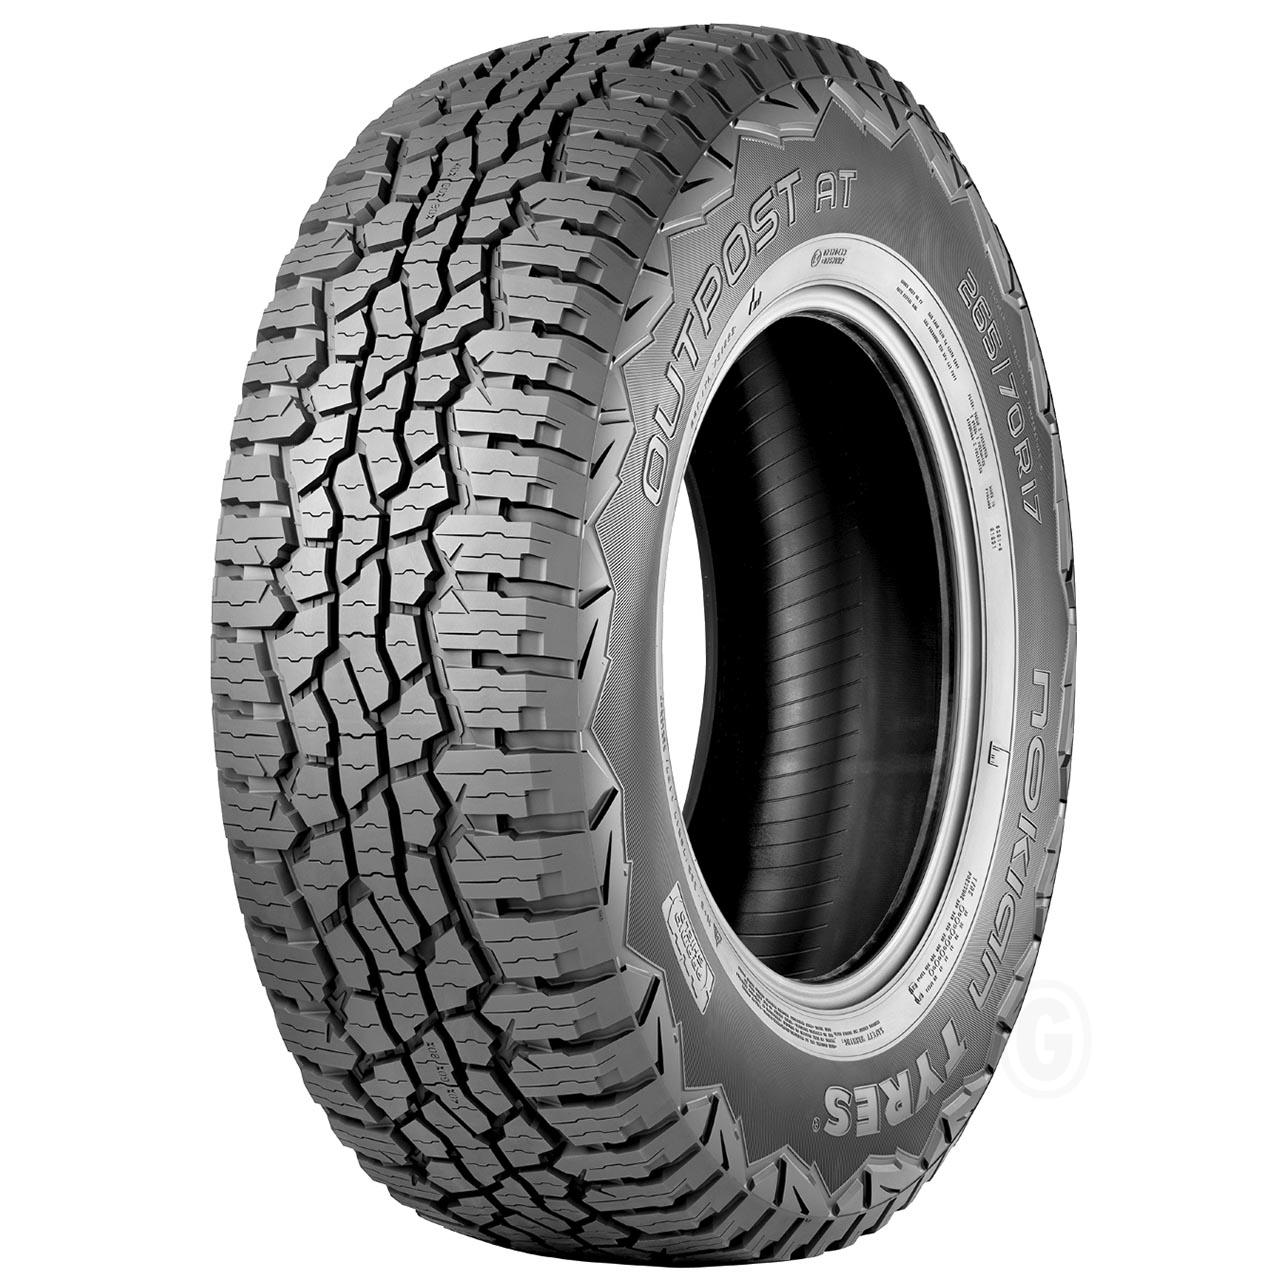 Nokian Outpost AT 315/70R17C 121/118S